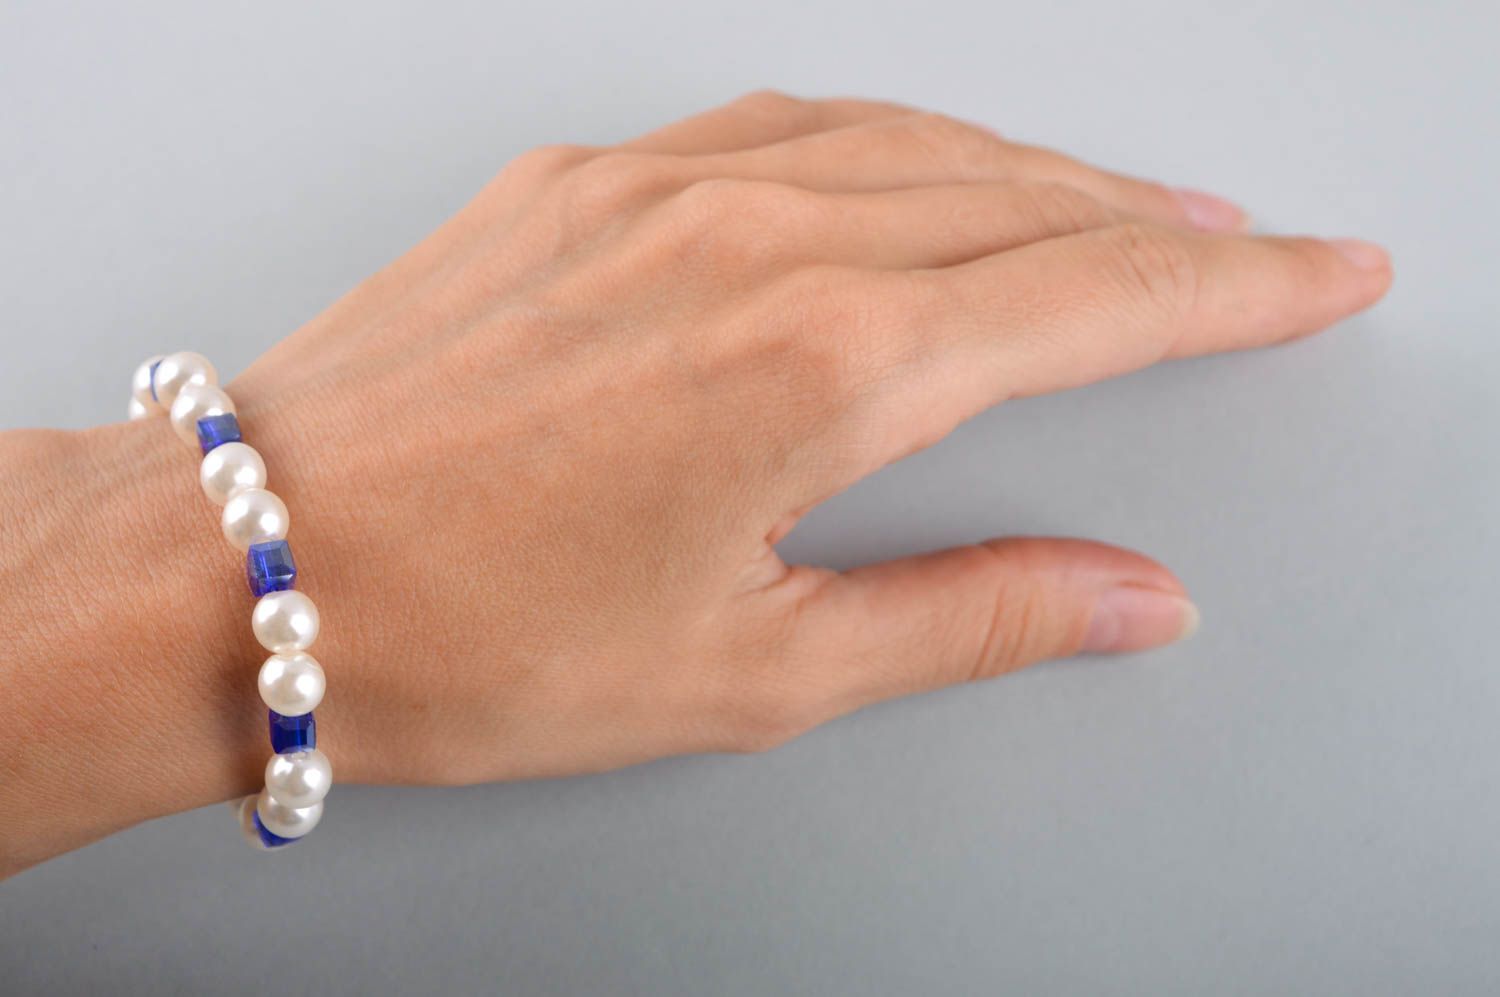 White and blue beads chain bracelet for young girls photo 5